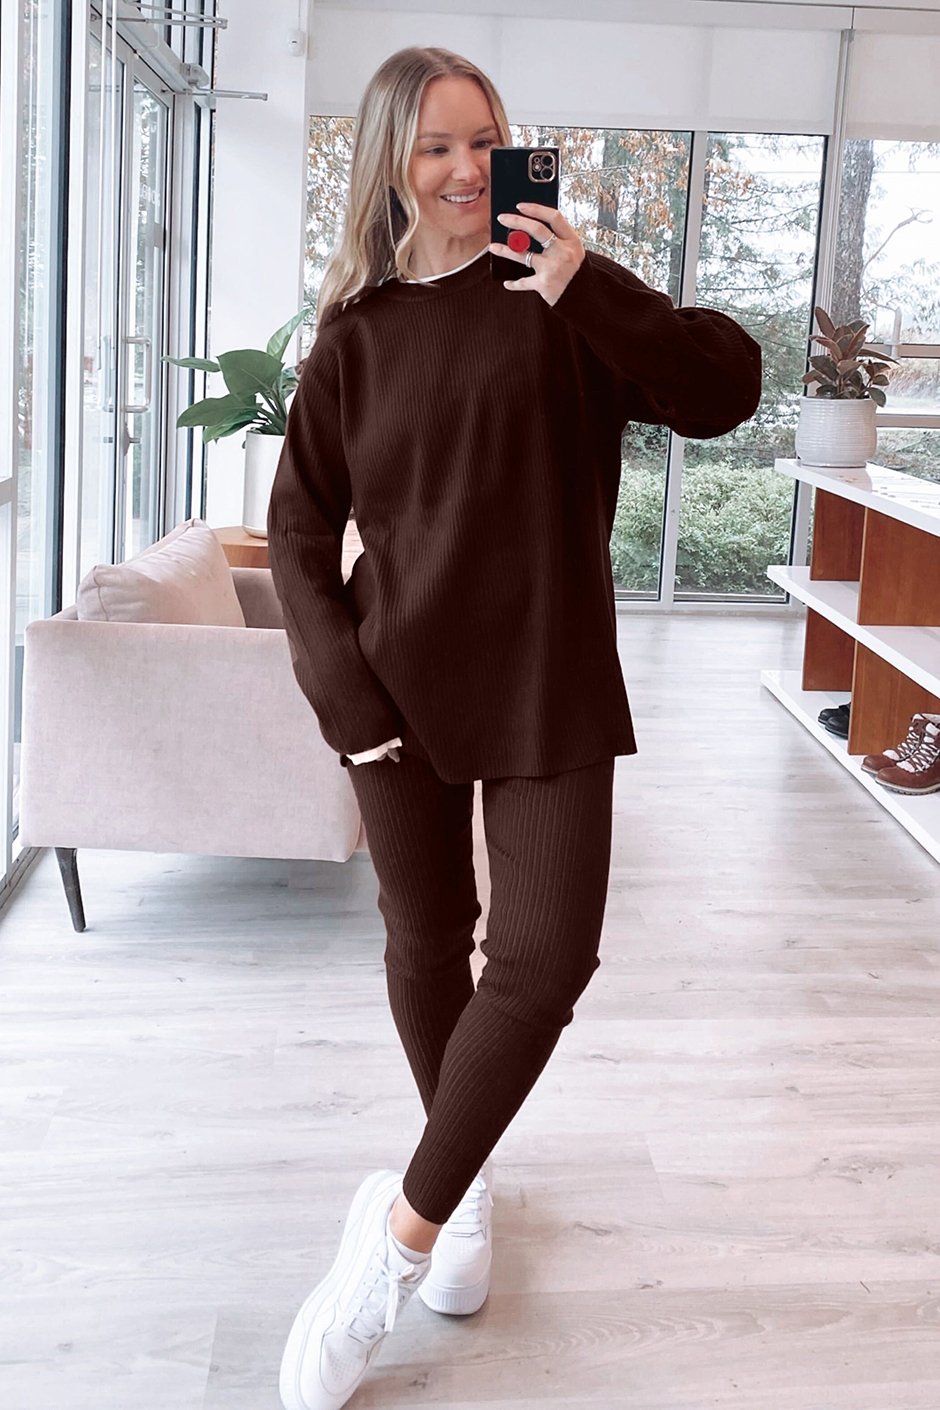 The Chic Ribbed Legging